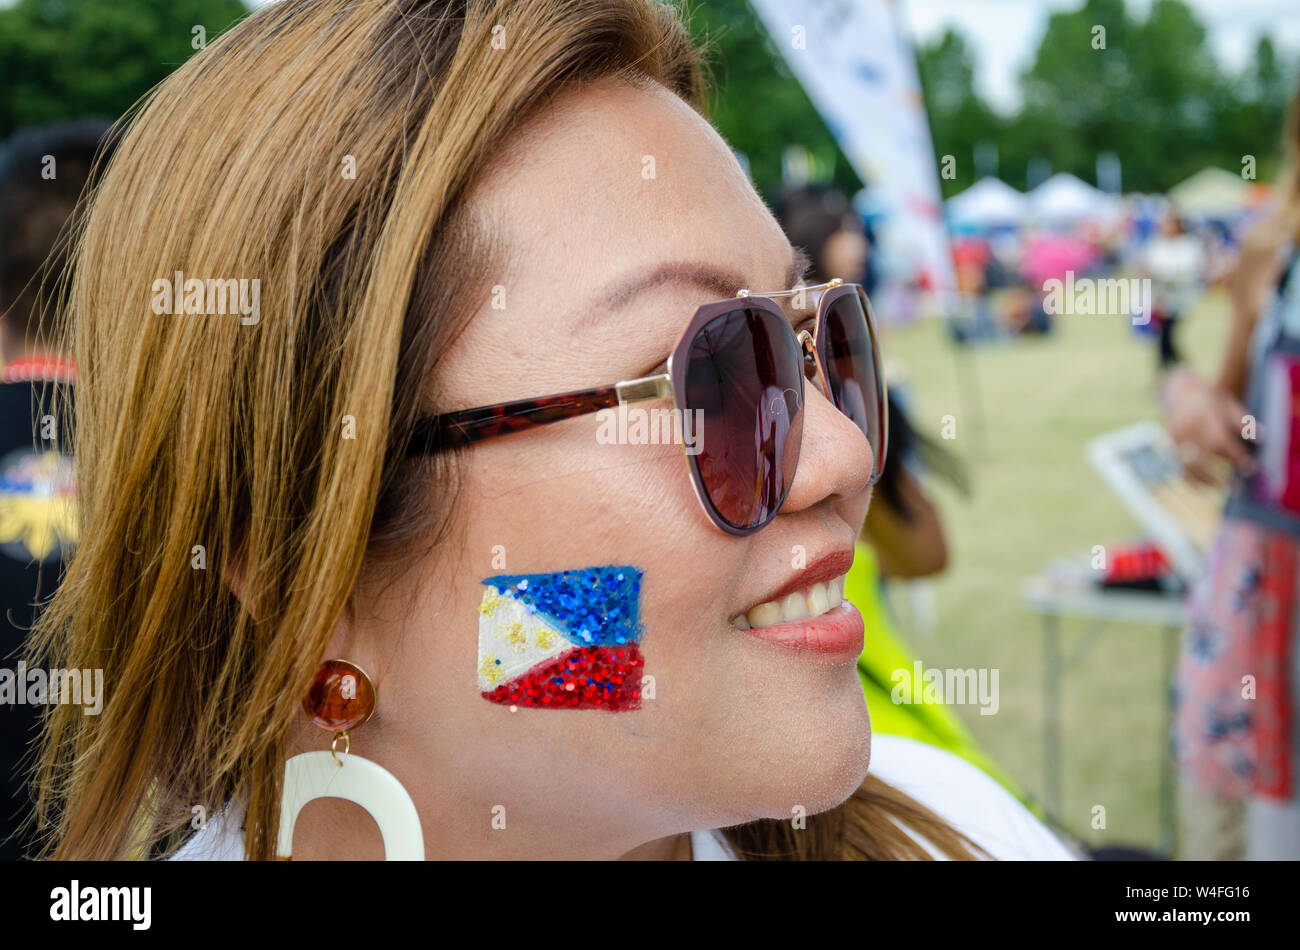 A Filipino lady wearing sunglasses with the flag of The Philippines painted with face paint and glitter on her cheek. Stock Photo